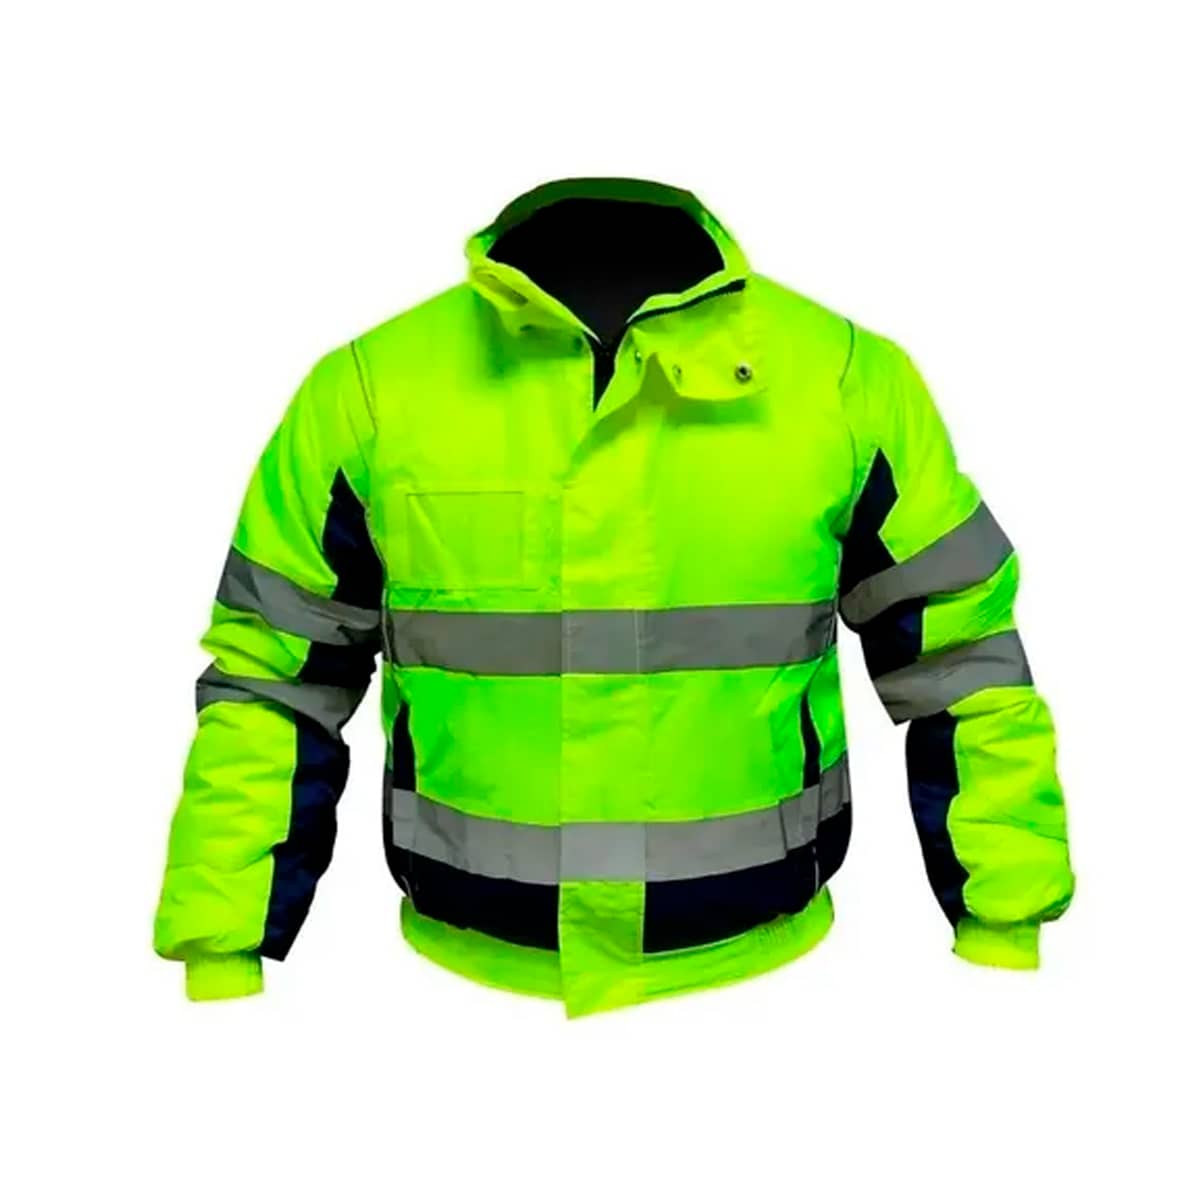 UNISEX Chaqueta Impermeable Chica Style Verde